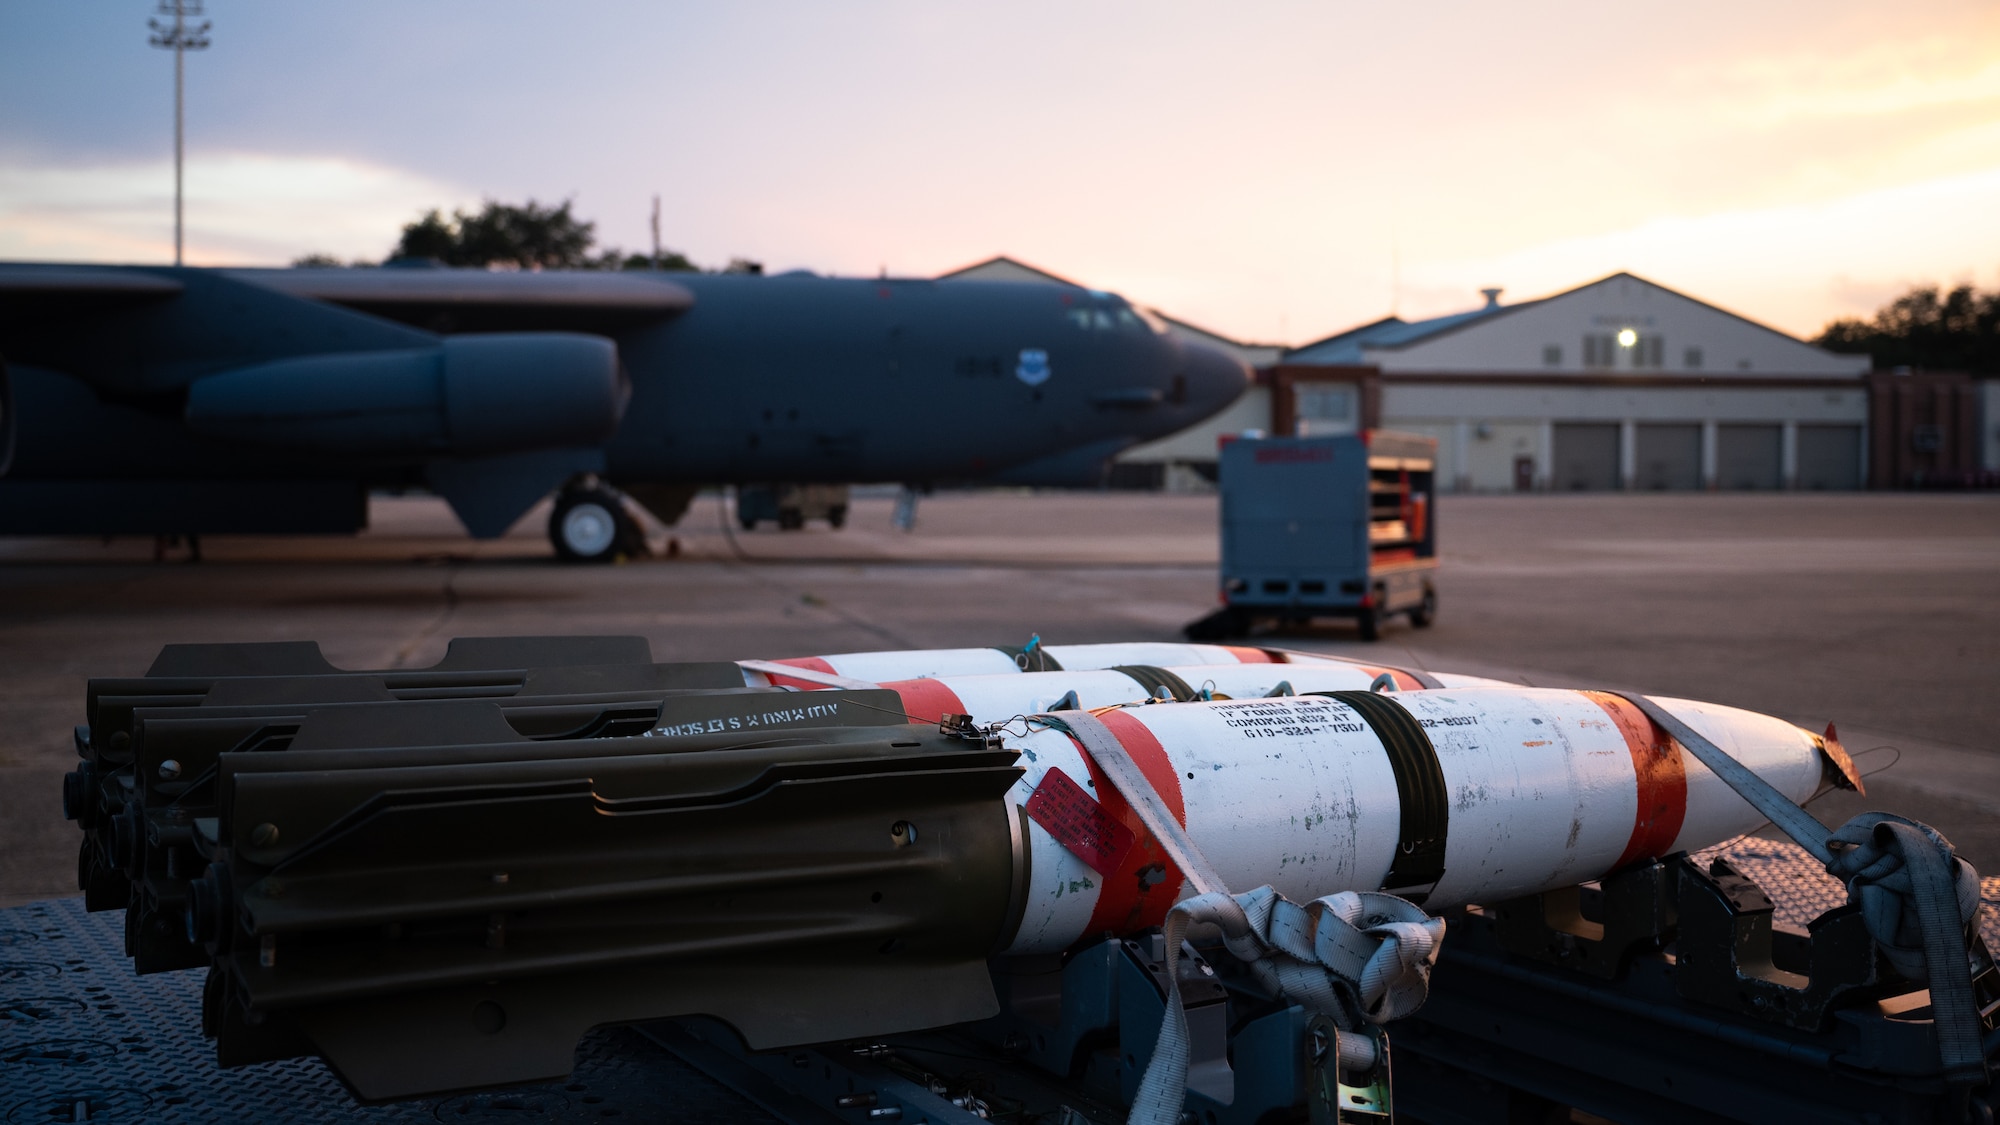 MK-62 Quickstrike naval mines sit in front of a B-52H Stratofortress at Barksdale Air Force Base, Louisiana, Aug. 25, 2021. The B-52 has the ability to carry and employ naval mines, as well as conventional and nuclear weapons. (U.S. Air Force photo by Senior Airman Jacob B. Wrightsman)